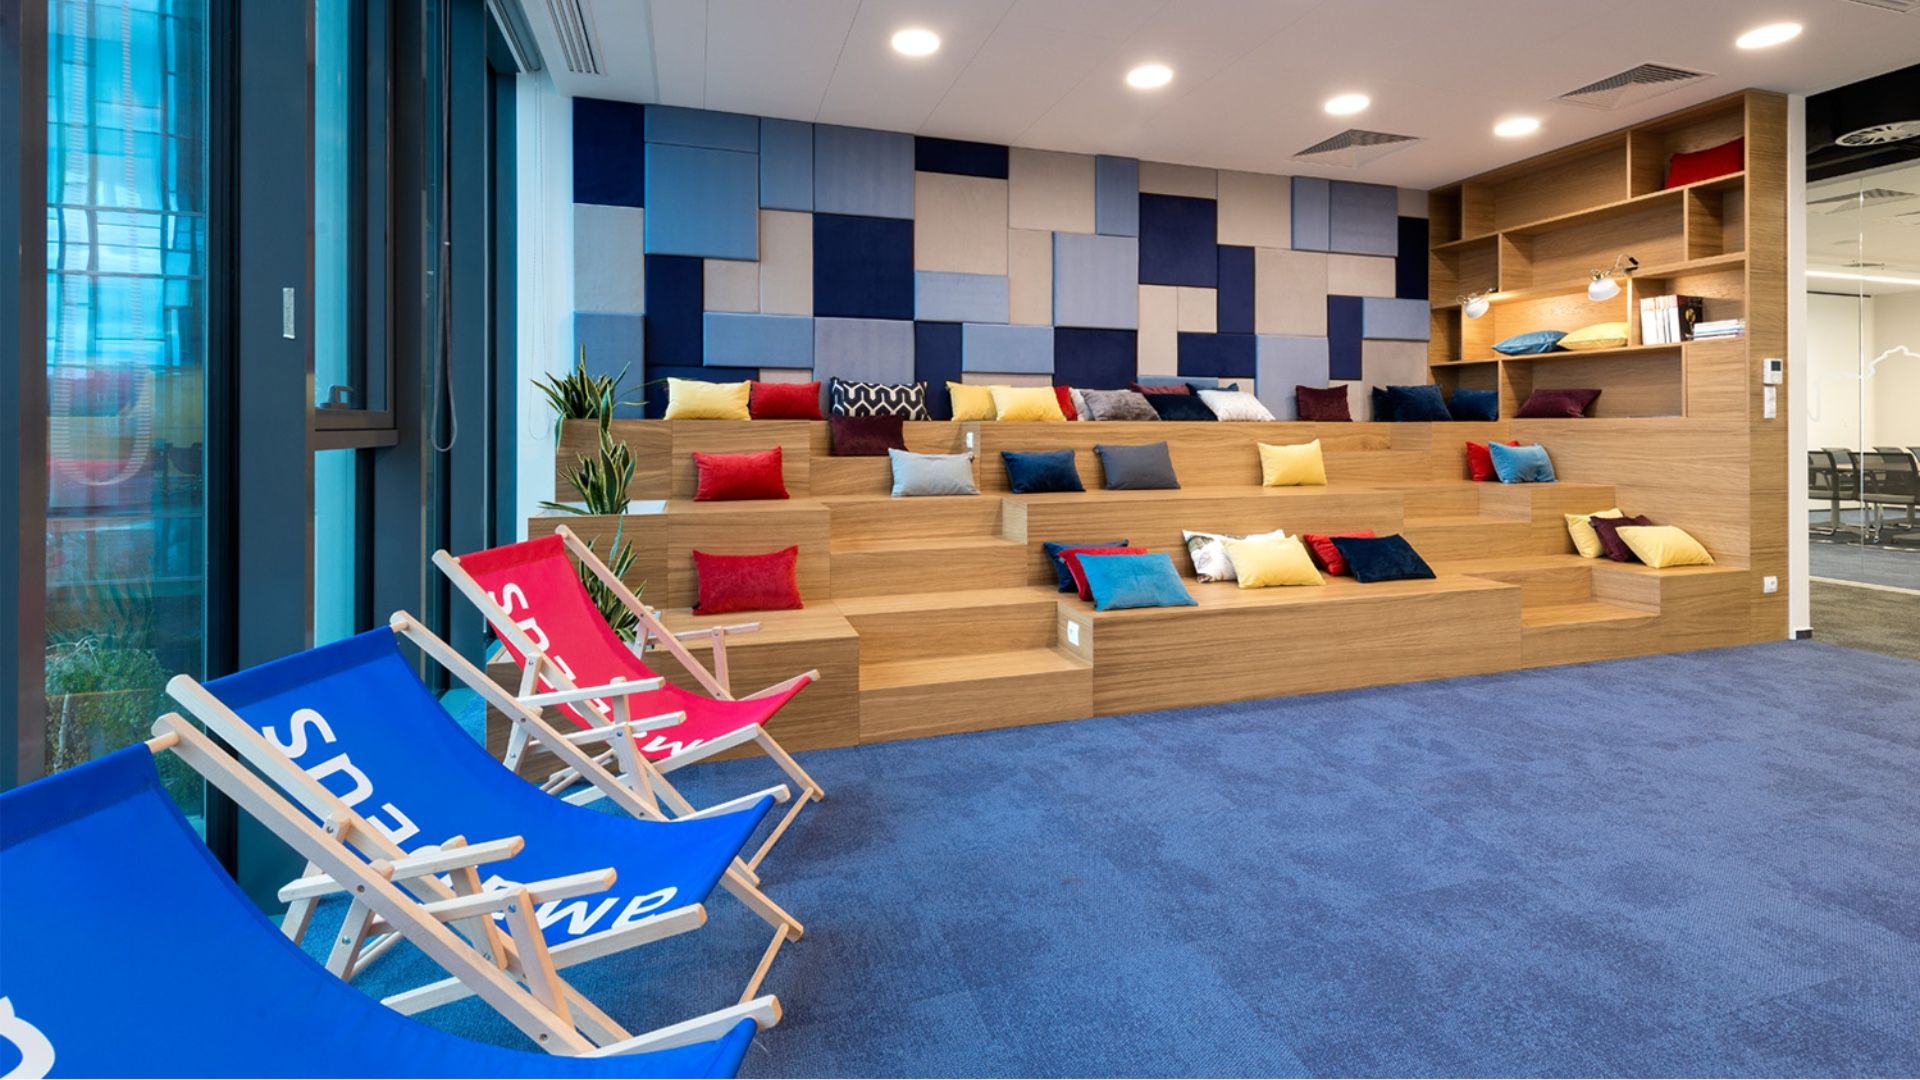 Kreativa - interior design for an office at a Amadeus in Warsaw, relaxation zone